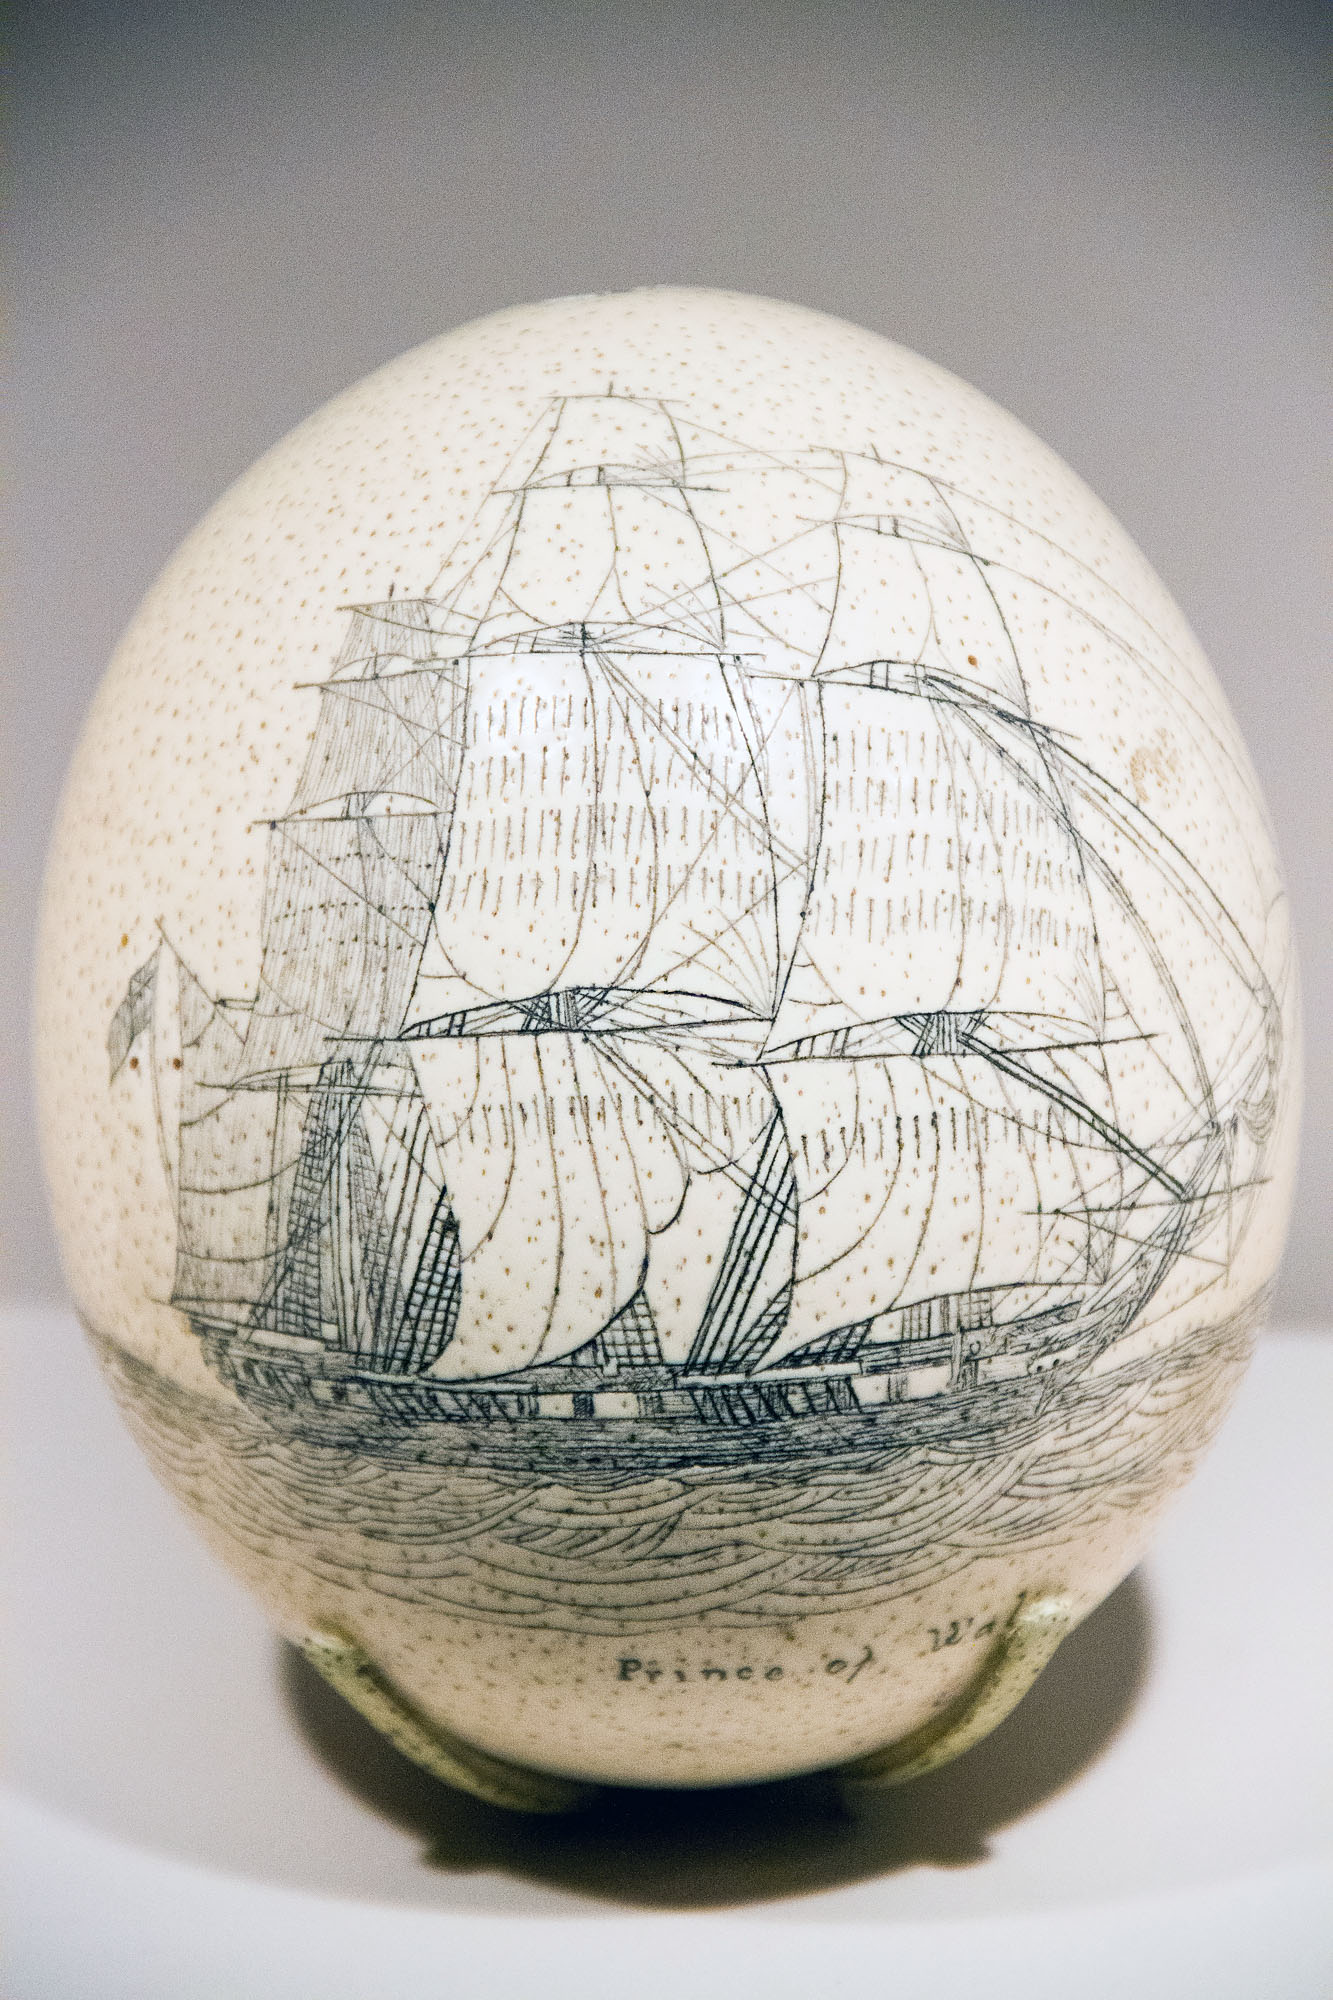 Drawing of a sail boat on an ostrich egg